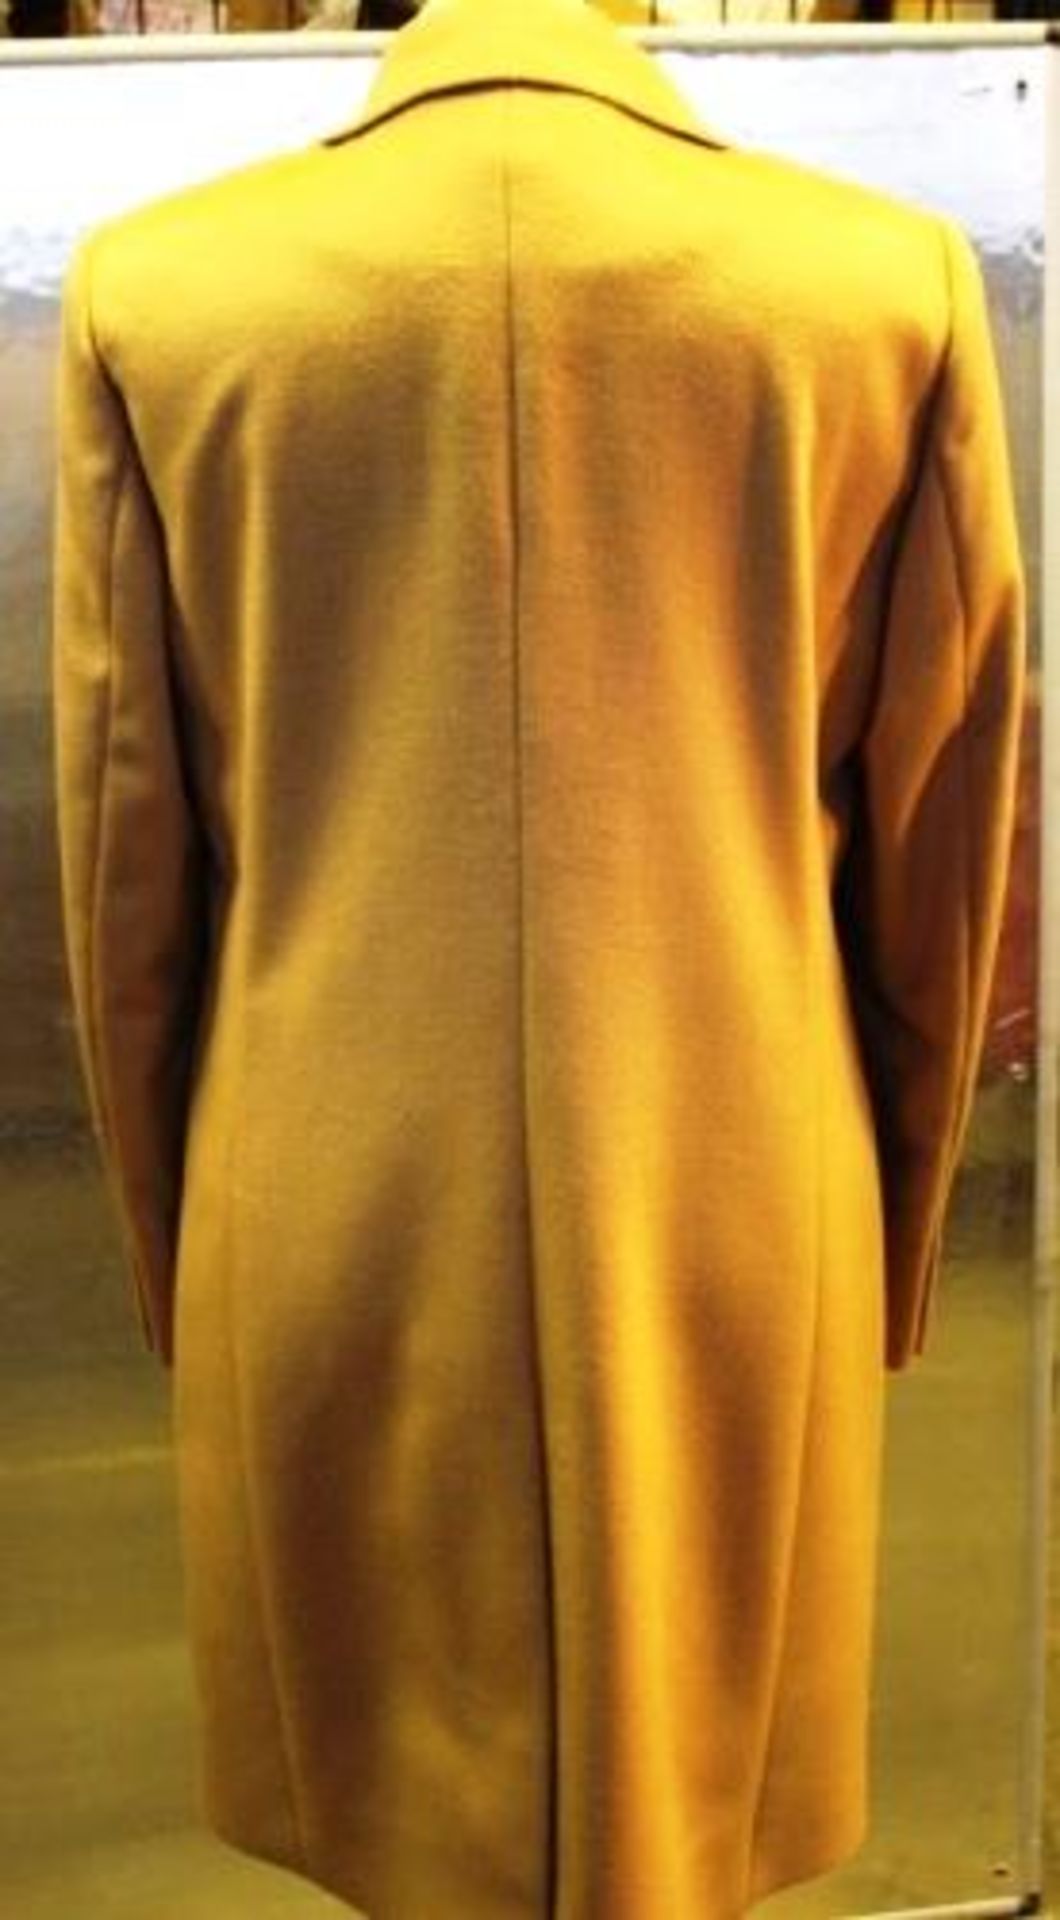 1 x Hobbs Tilda camel wool coat, UK size 10, RRP £299.00 - New with tags (clothesrail1) - Image 2 of 2